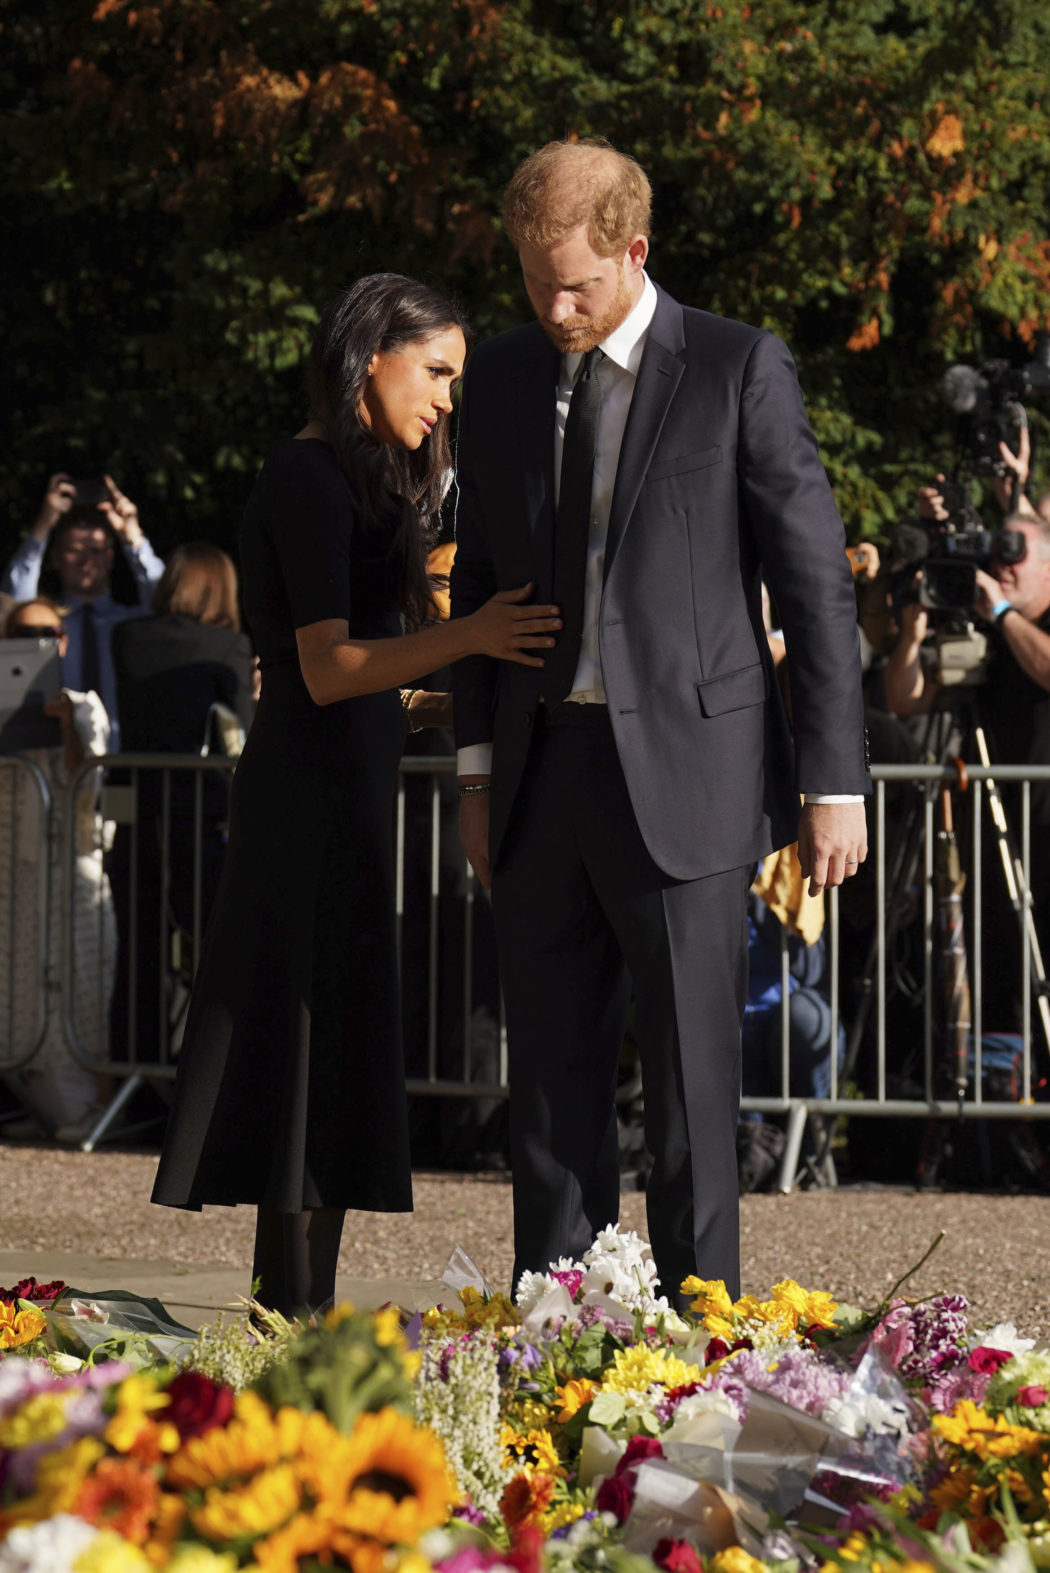 Meghan, Duchess of Sussex and Prince Harry look at floral tributes as they meet members of the public at Windsor Castle, following the death of Queen Elizabeth II on Thursday, in Windsor, England, Saturday, Sept. 10, 2022. (Kirsty O’Connor/Pool Photo via AP)